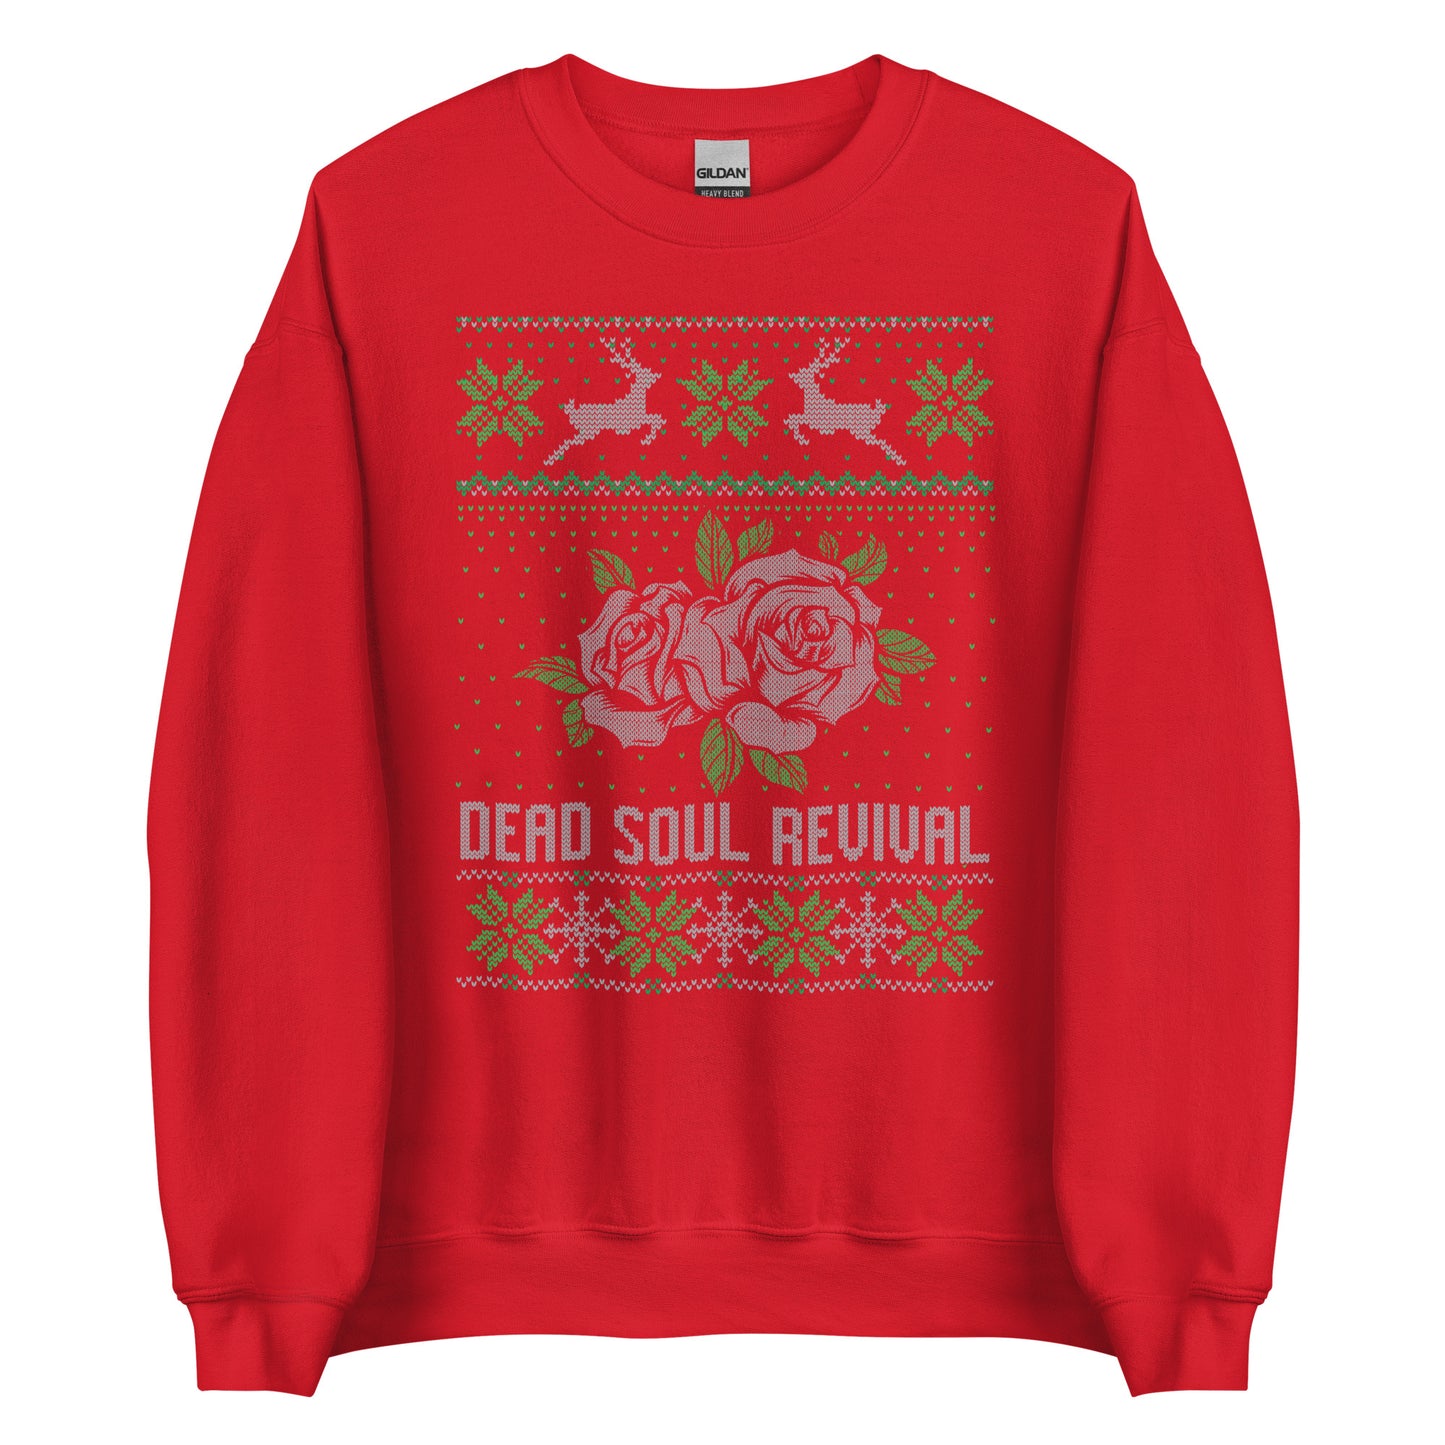 Dead Soul Revival Classic Ugly Christmas Sweater (Black Roses)